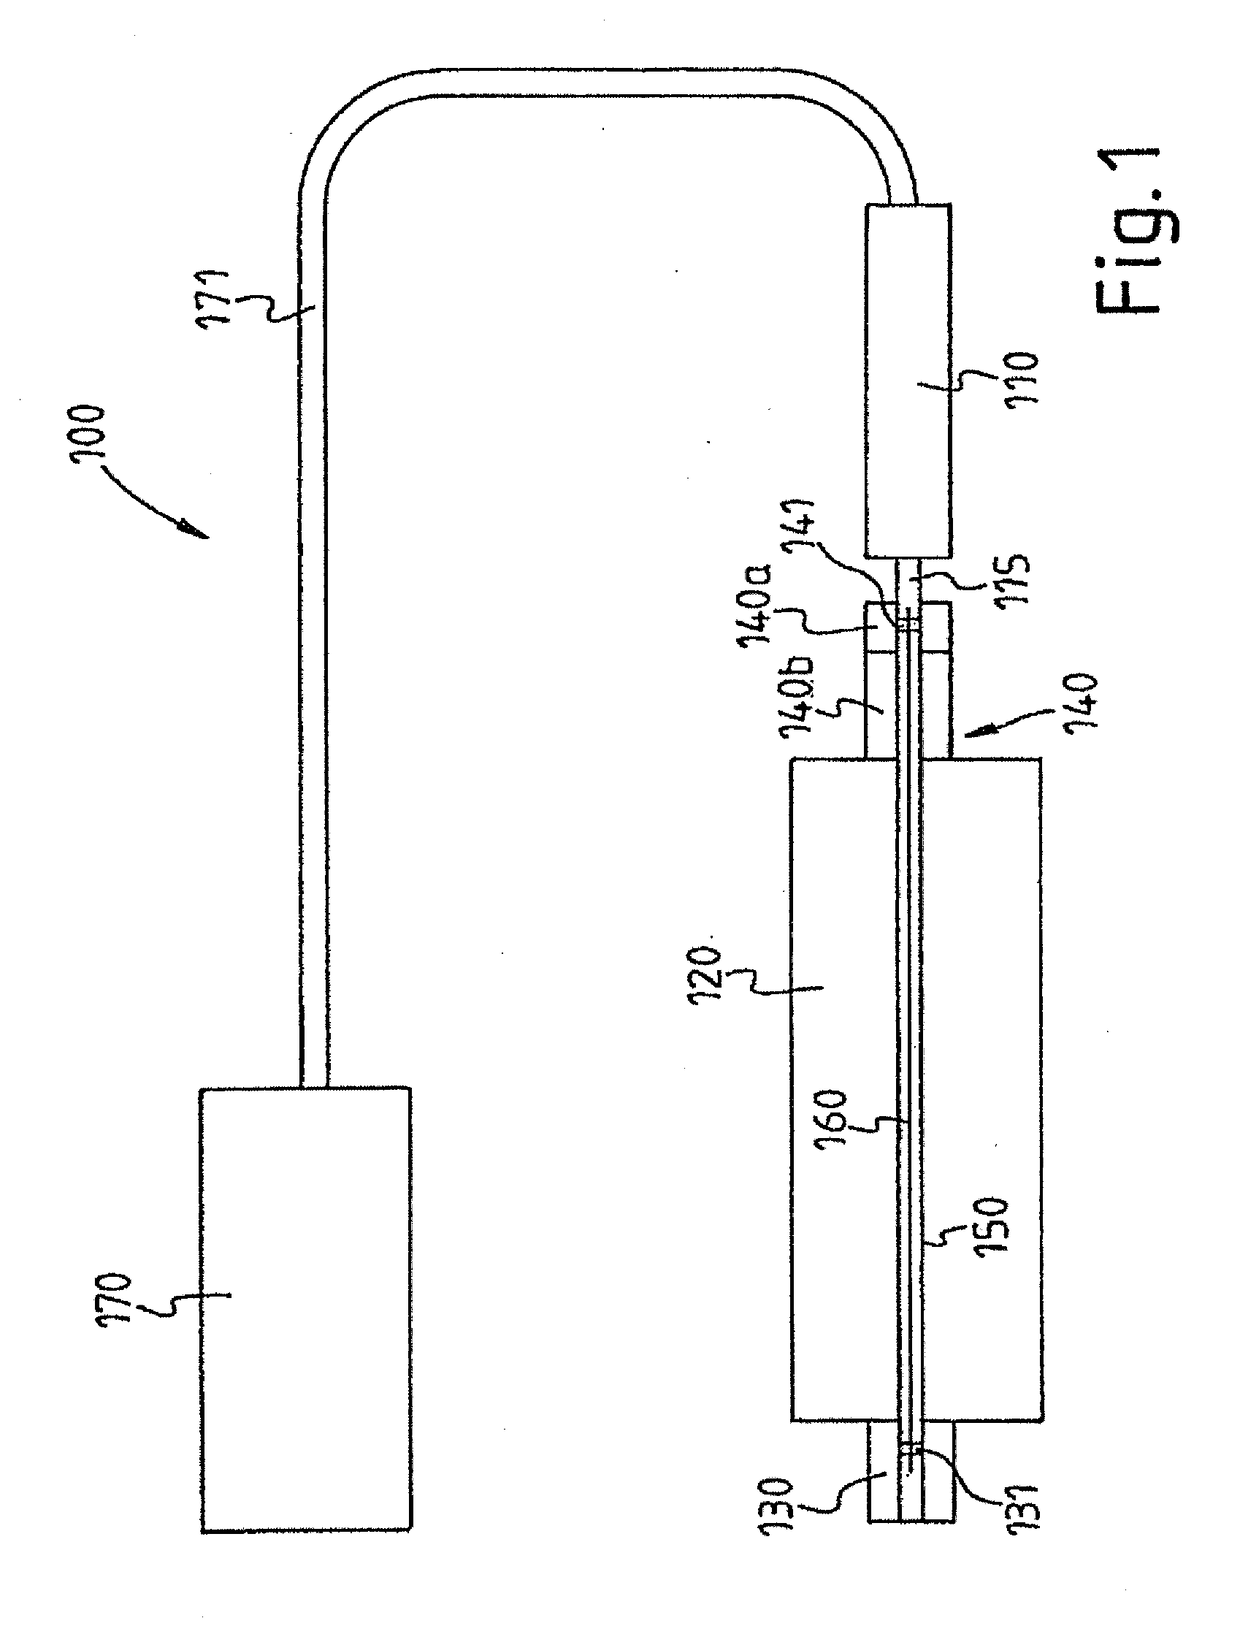 Lubrication system comprising a spindle and an aerosol dispenser